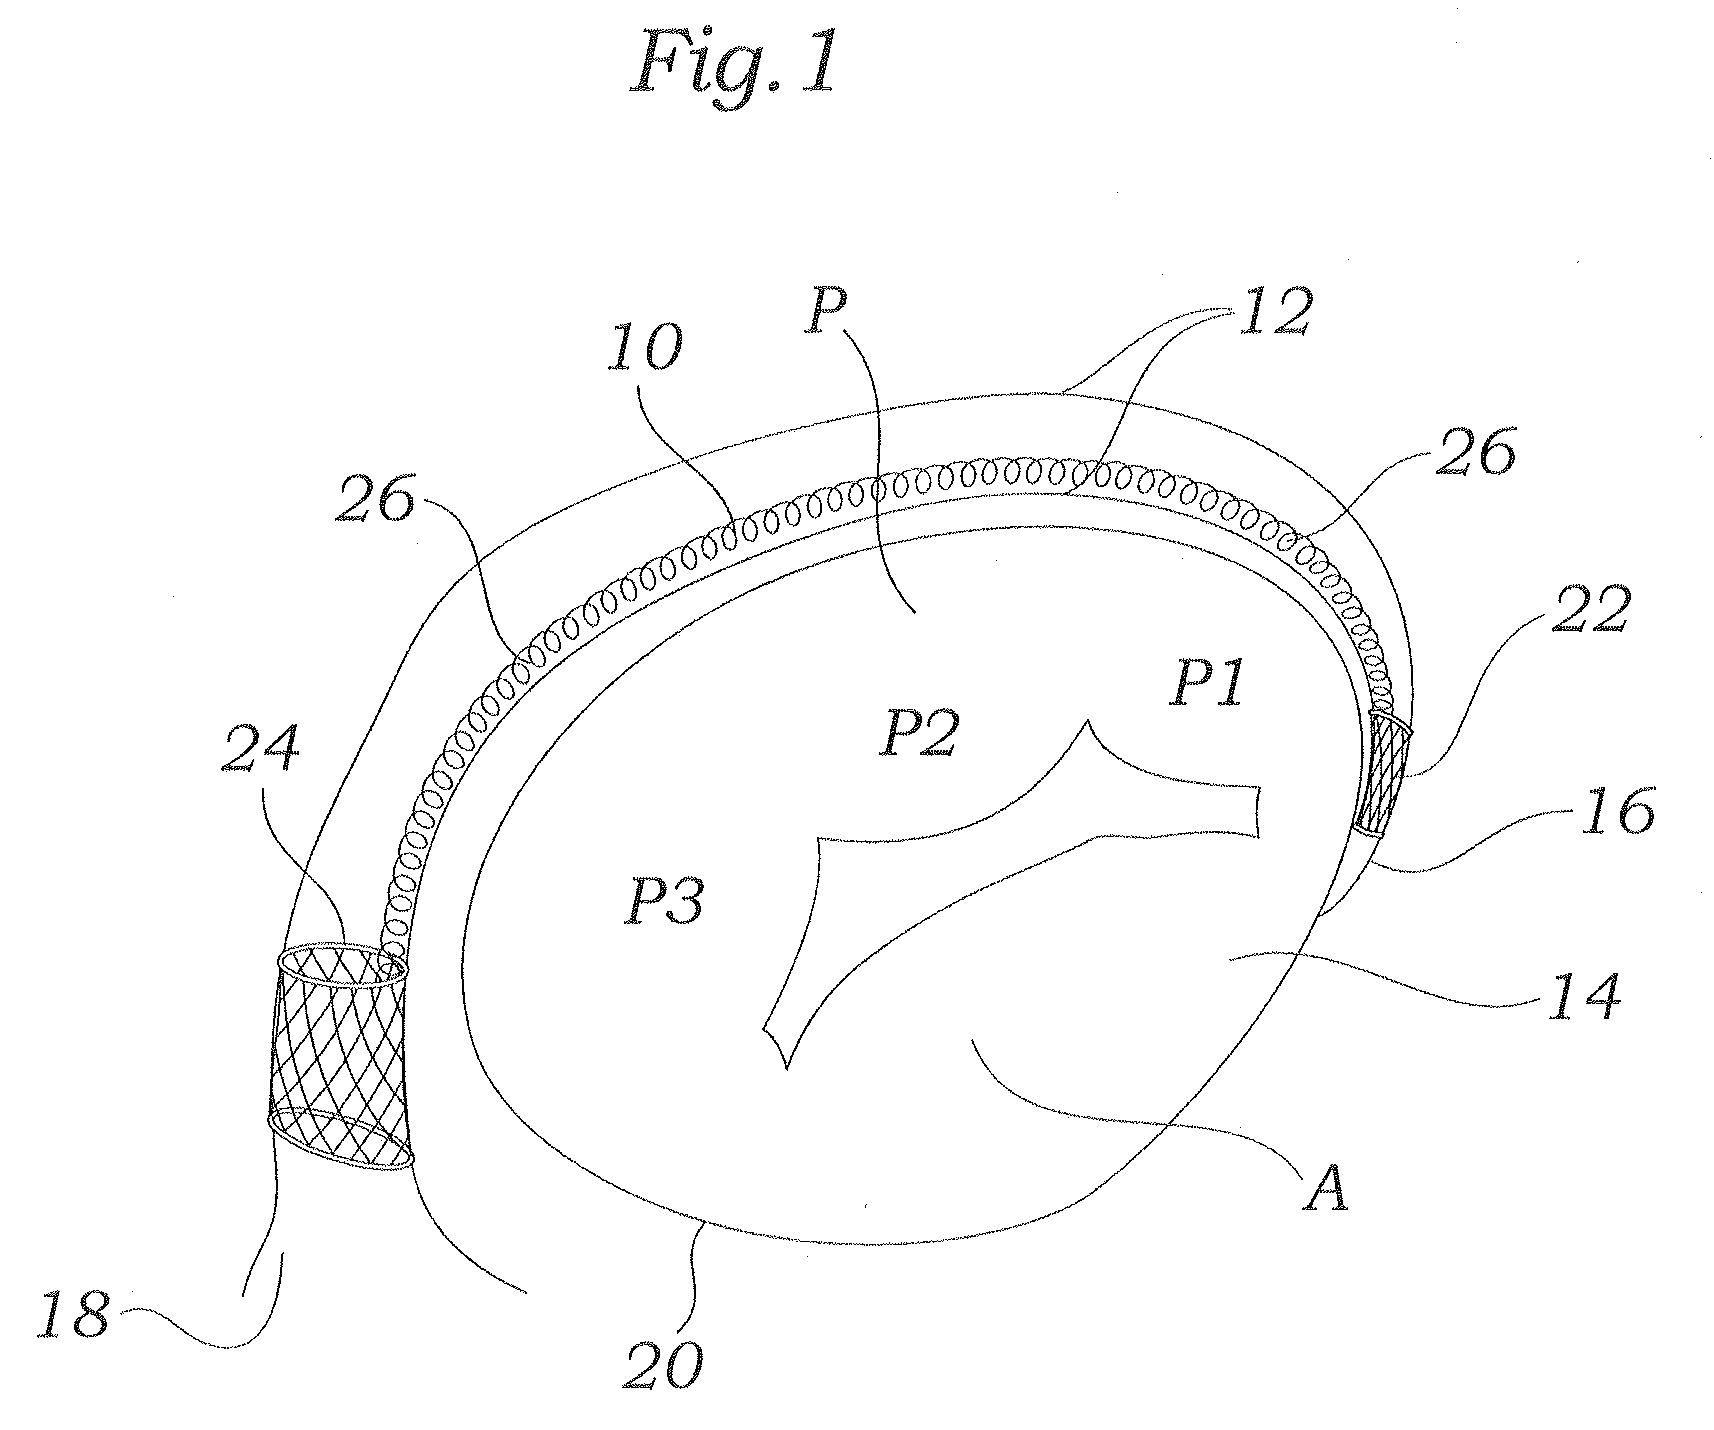 Coiled implant for mitral valve repair